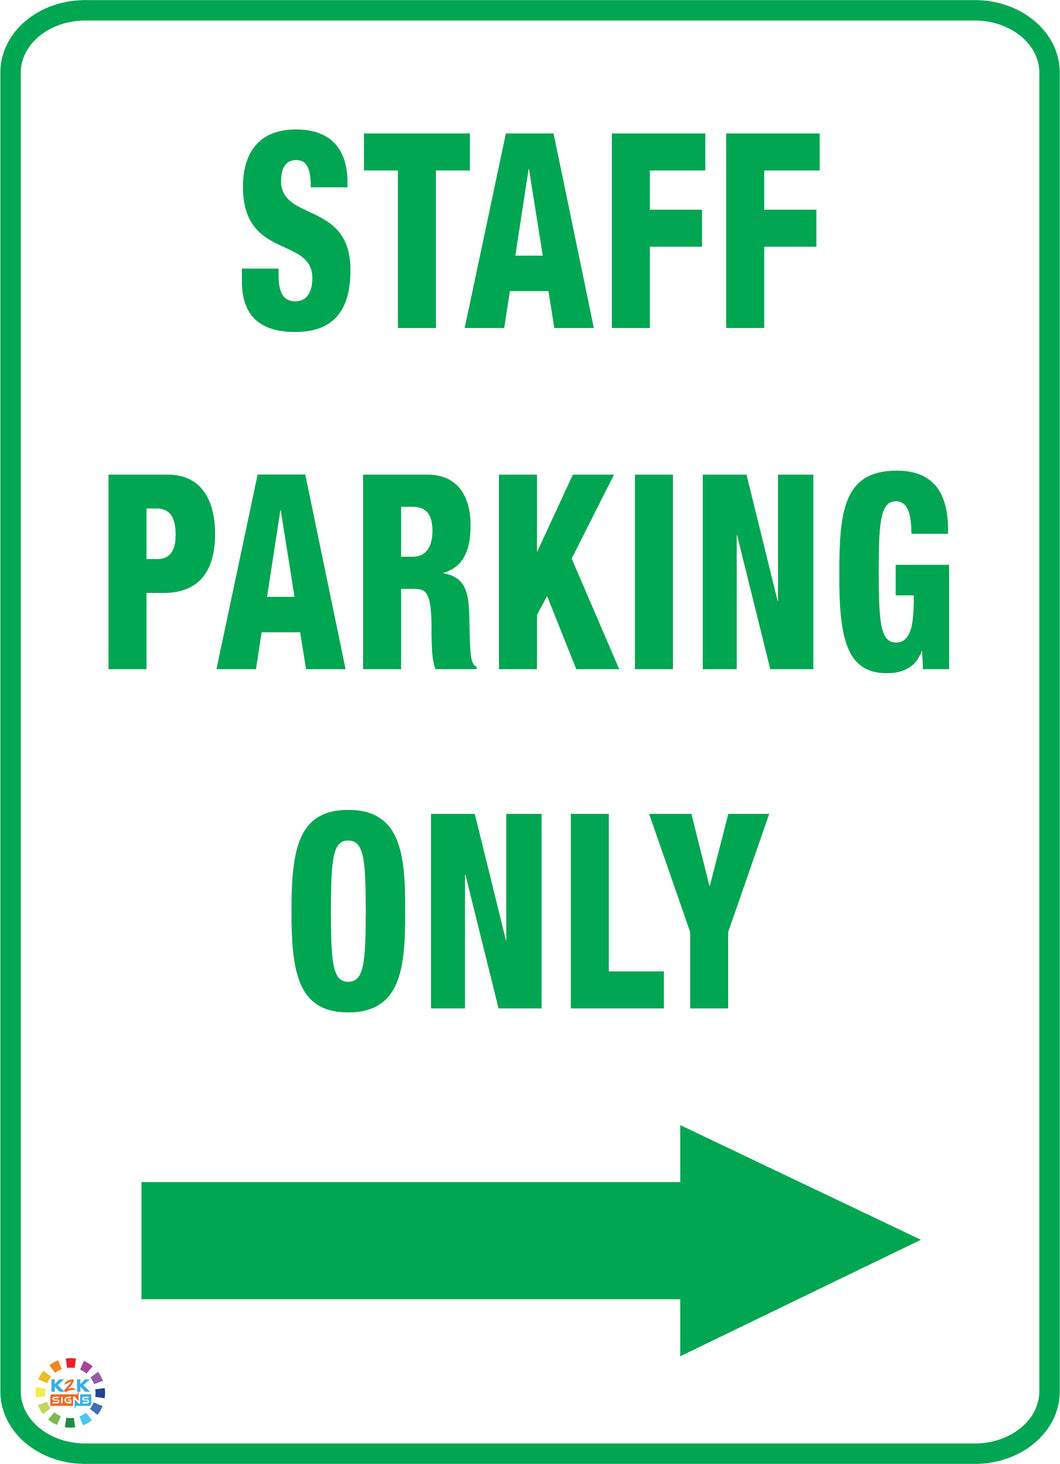 Staff Parking Only (Right Arrow) signs